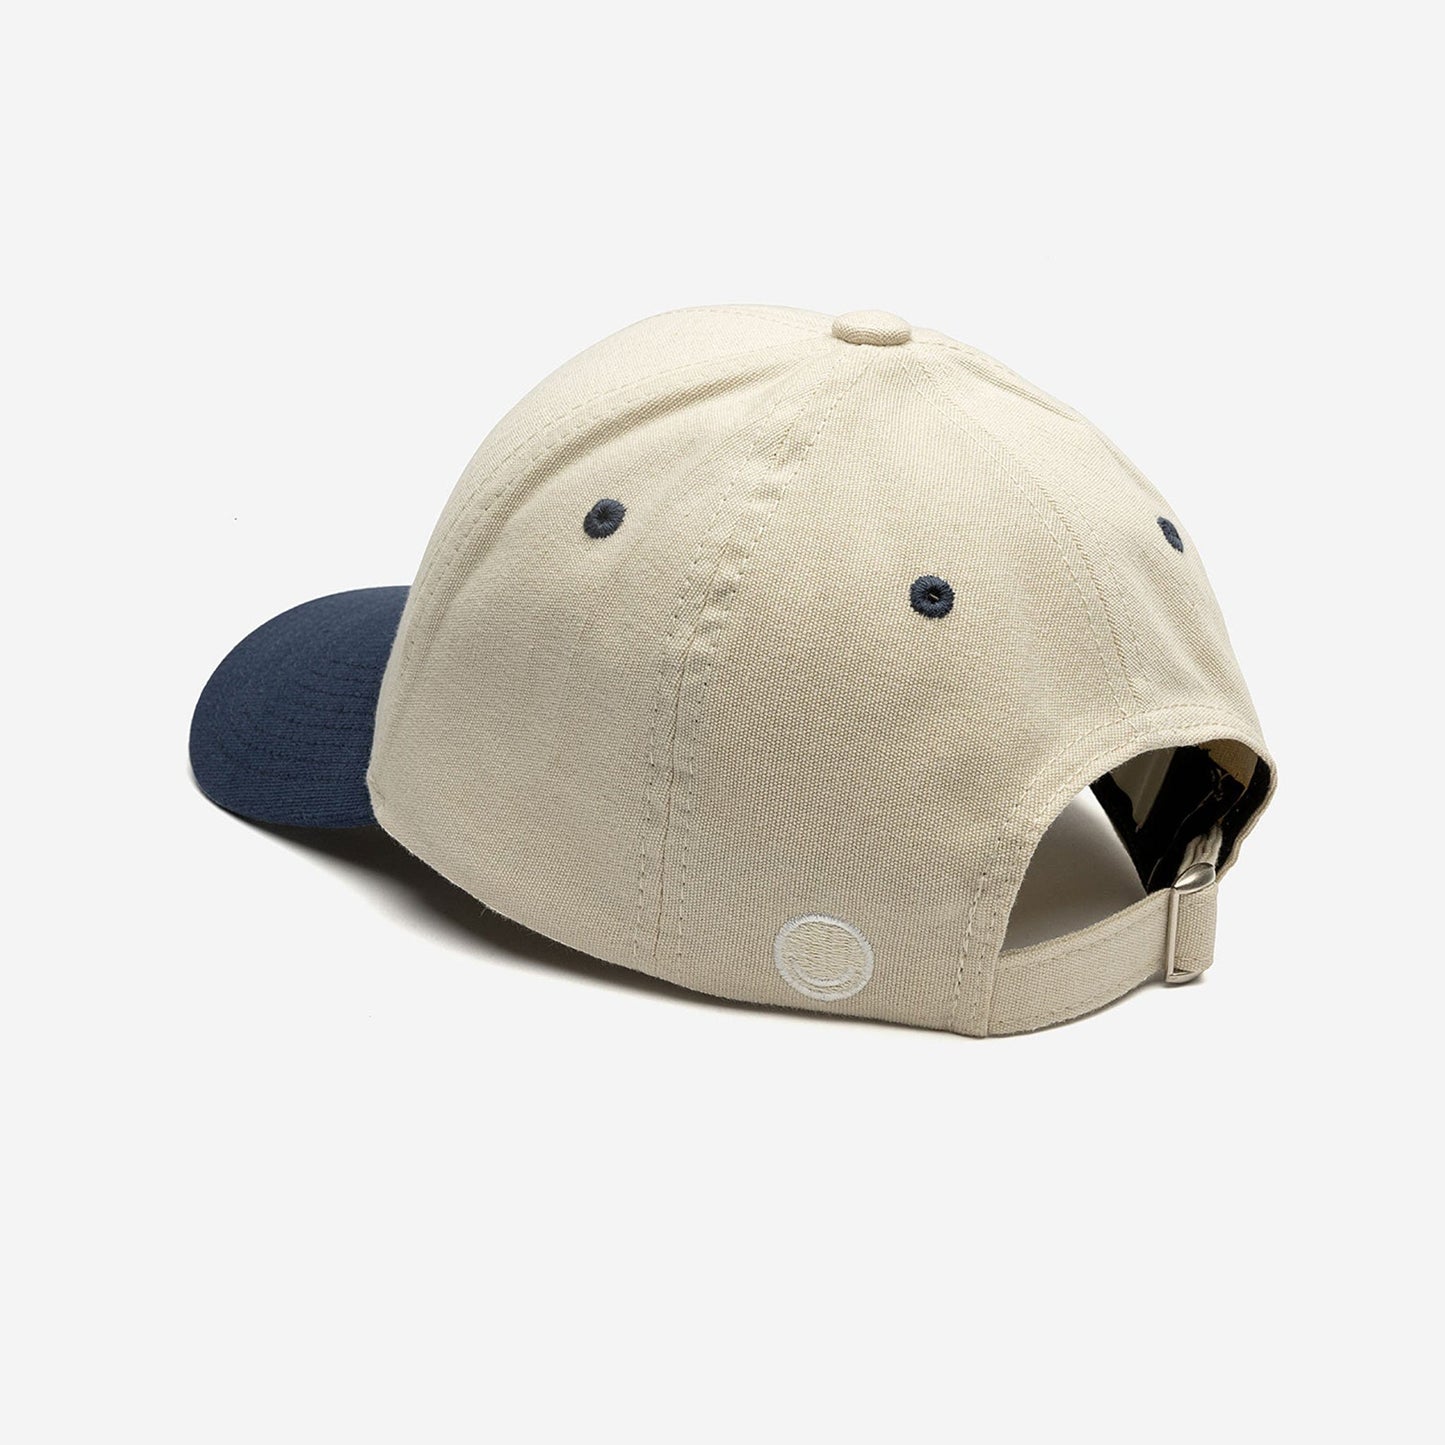 Casual Style Baseball Cap, Oyster-Navy